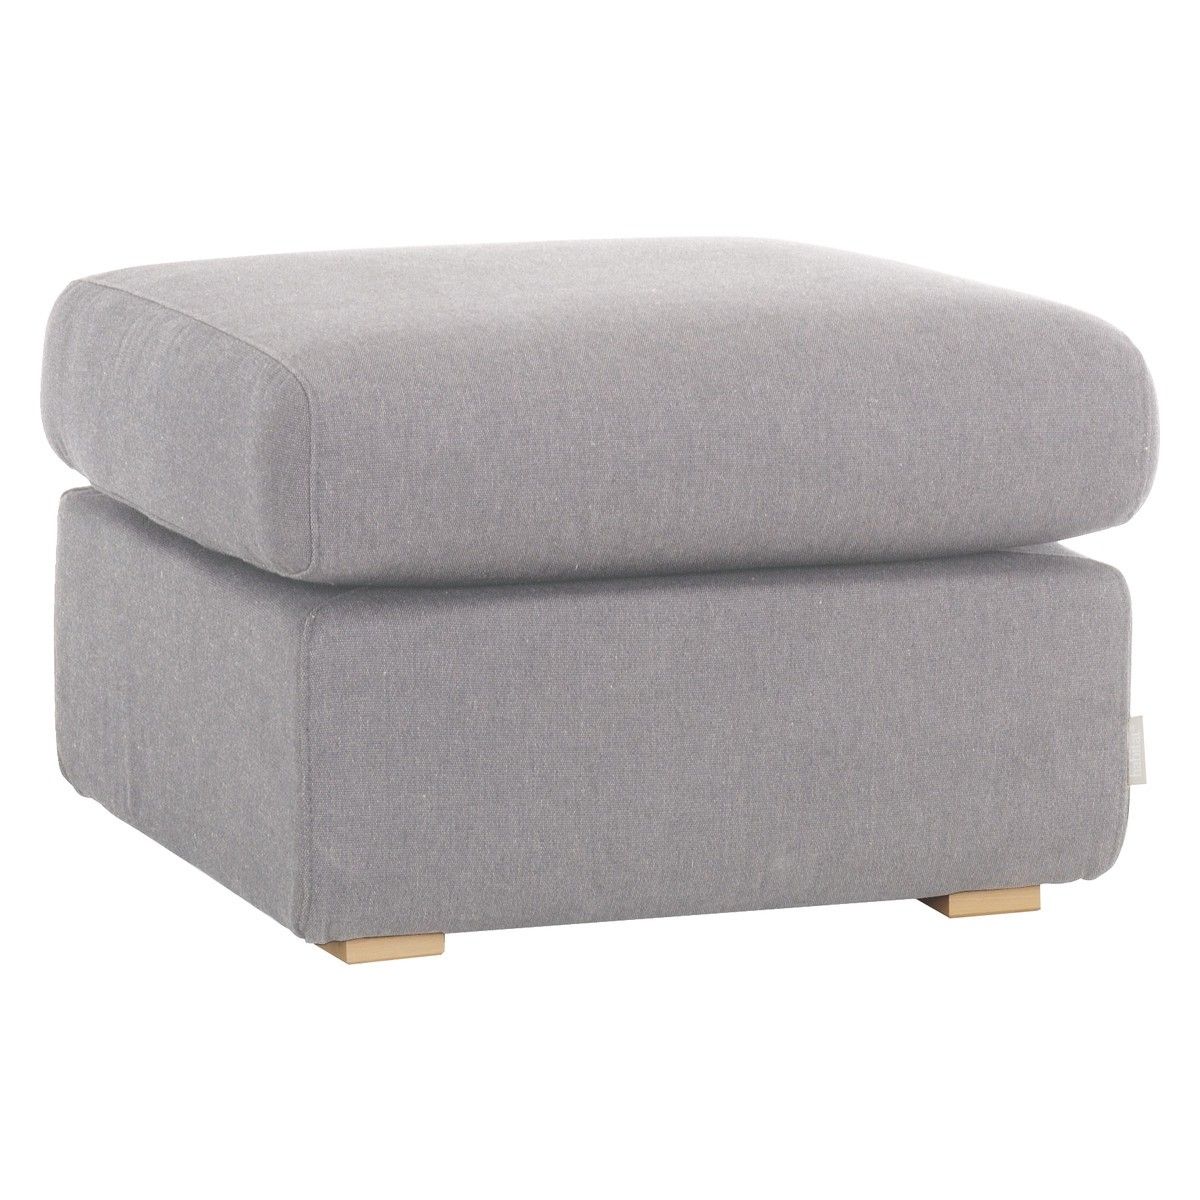 Porto Grey Fabric Footstool Buy Now At Habitat Uk Within Fabric Footstools (View 6 of 15)